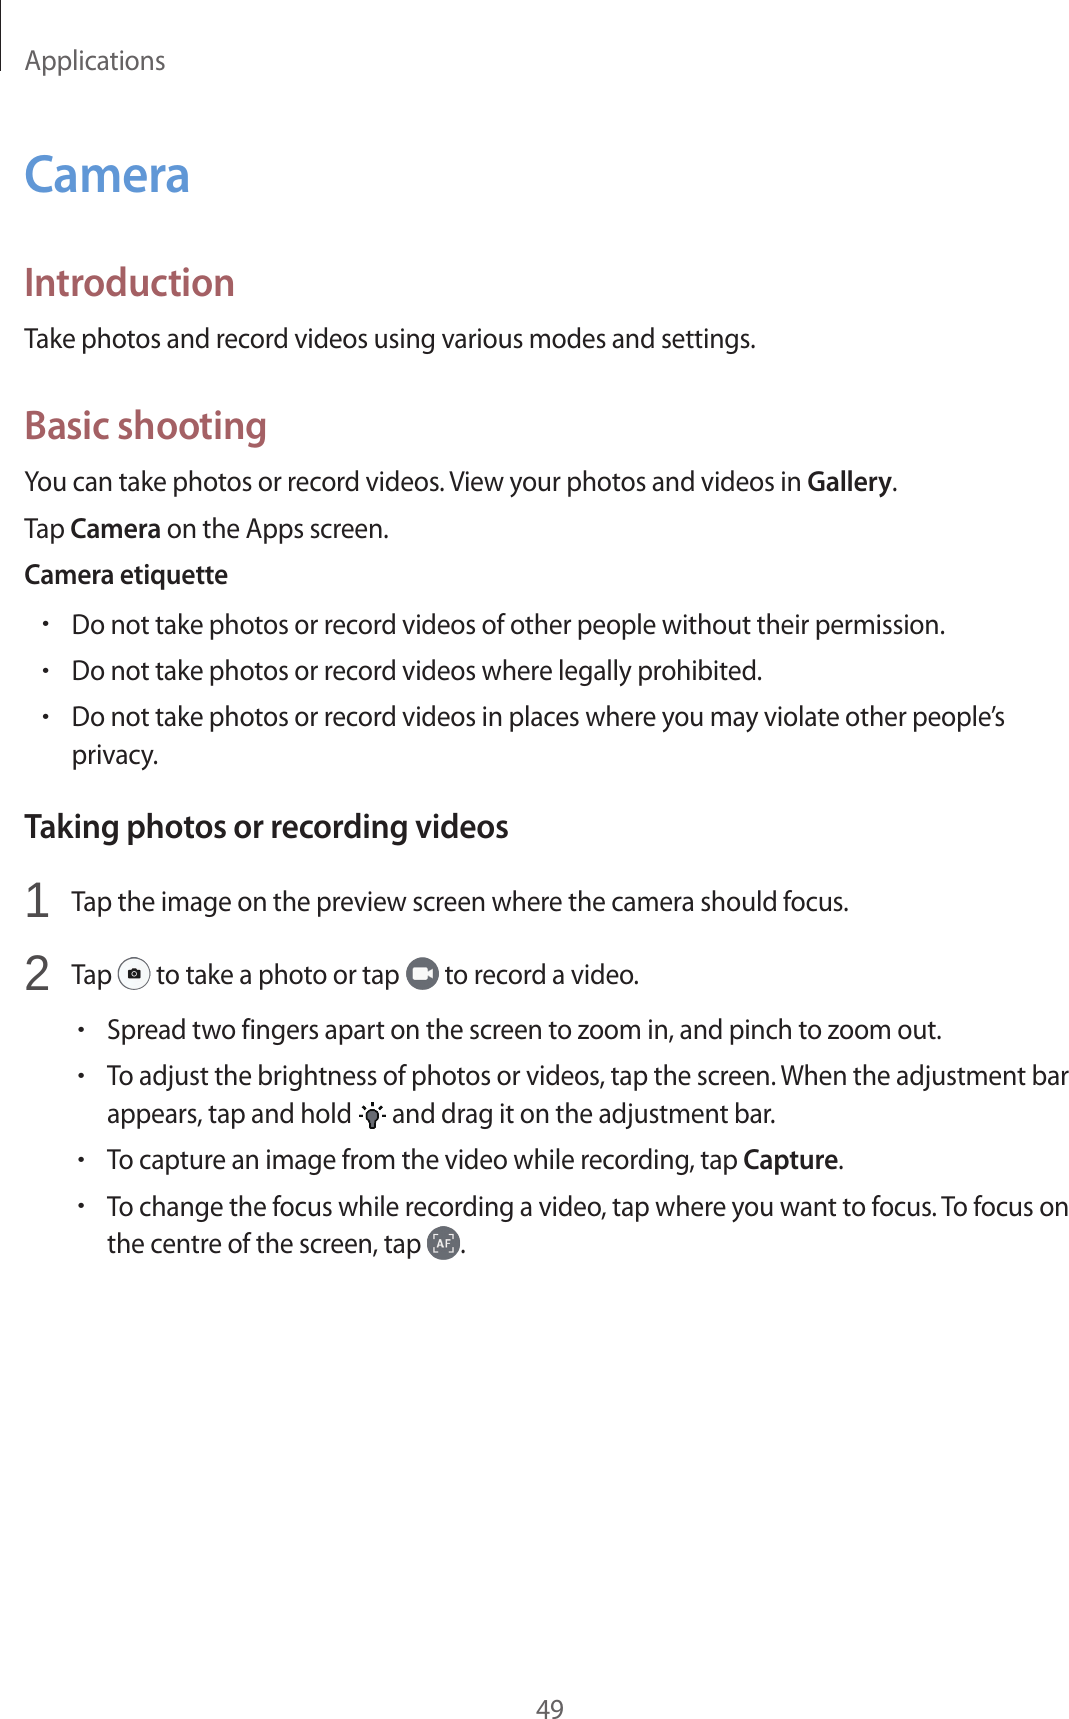 Applications49CameraIntroductionTake photos and record videos using various modes and settings.Basic shootingYou can take photos or record videos. View your photos and videos in Gallery.Tap Camera on the Apps screen.Camera etiquette•Do not take photos or record videos of other people without their permission.•Do not take photos or record videos where legally prohibited.•Do not take photos or record videos in places where you may violate other people’s privacy.Taking photos or recording videos1  Tap the image on the preview screen where the camera should focus.2  Tap   to take a photo or tap   to record a video.•Spread two fingers apart on the screen to zoom in, and pinch to zoom out.•To adjust the brightness of photos or videos, tap the screen. When the adjustment bar appears, tap and hold   and drag it on the adjustment bar.•To capture an image from the video while recording, tap Capture.•To change the focus while recording a video, tap where you want to focus. To focus on the centre of the screen, tap  .